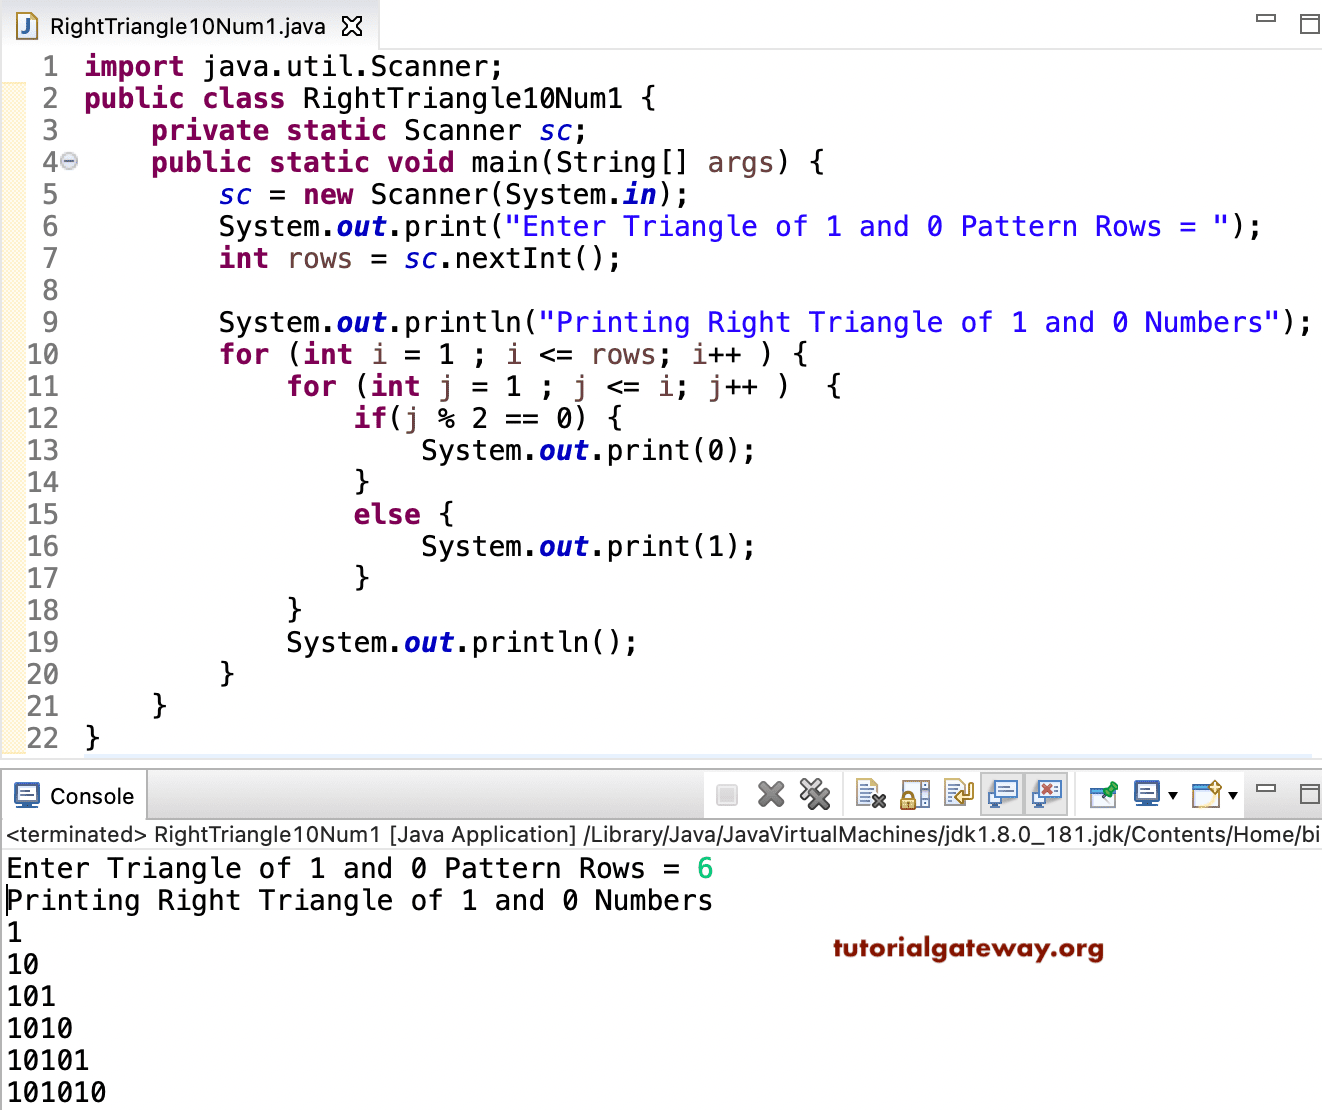 Java Program to Print Right Triangle of 1 and 0 Numbers